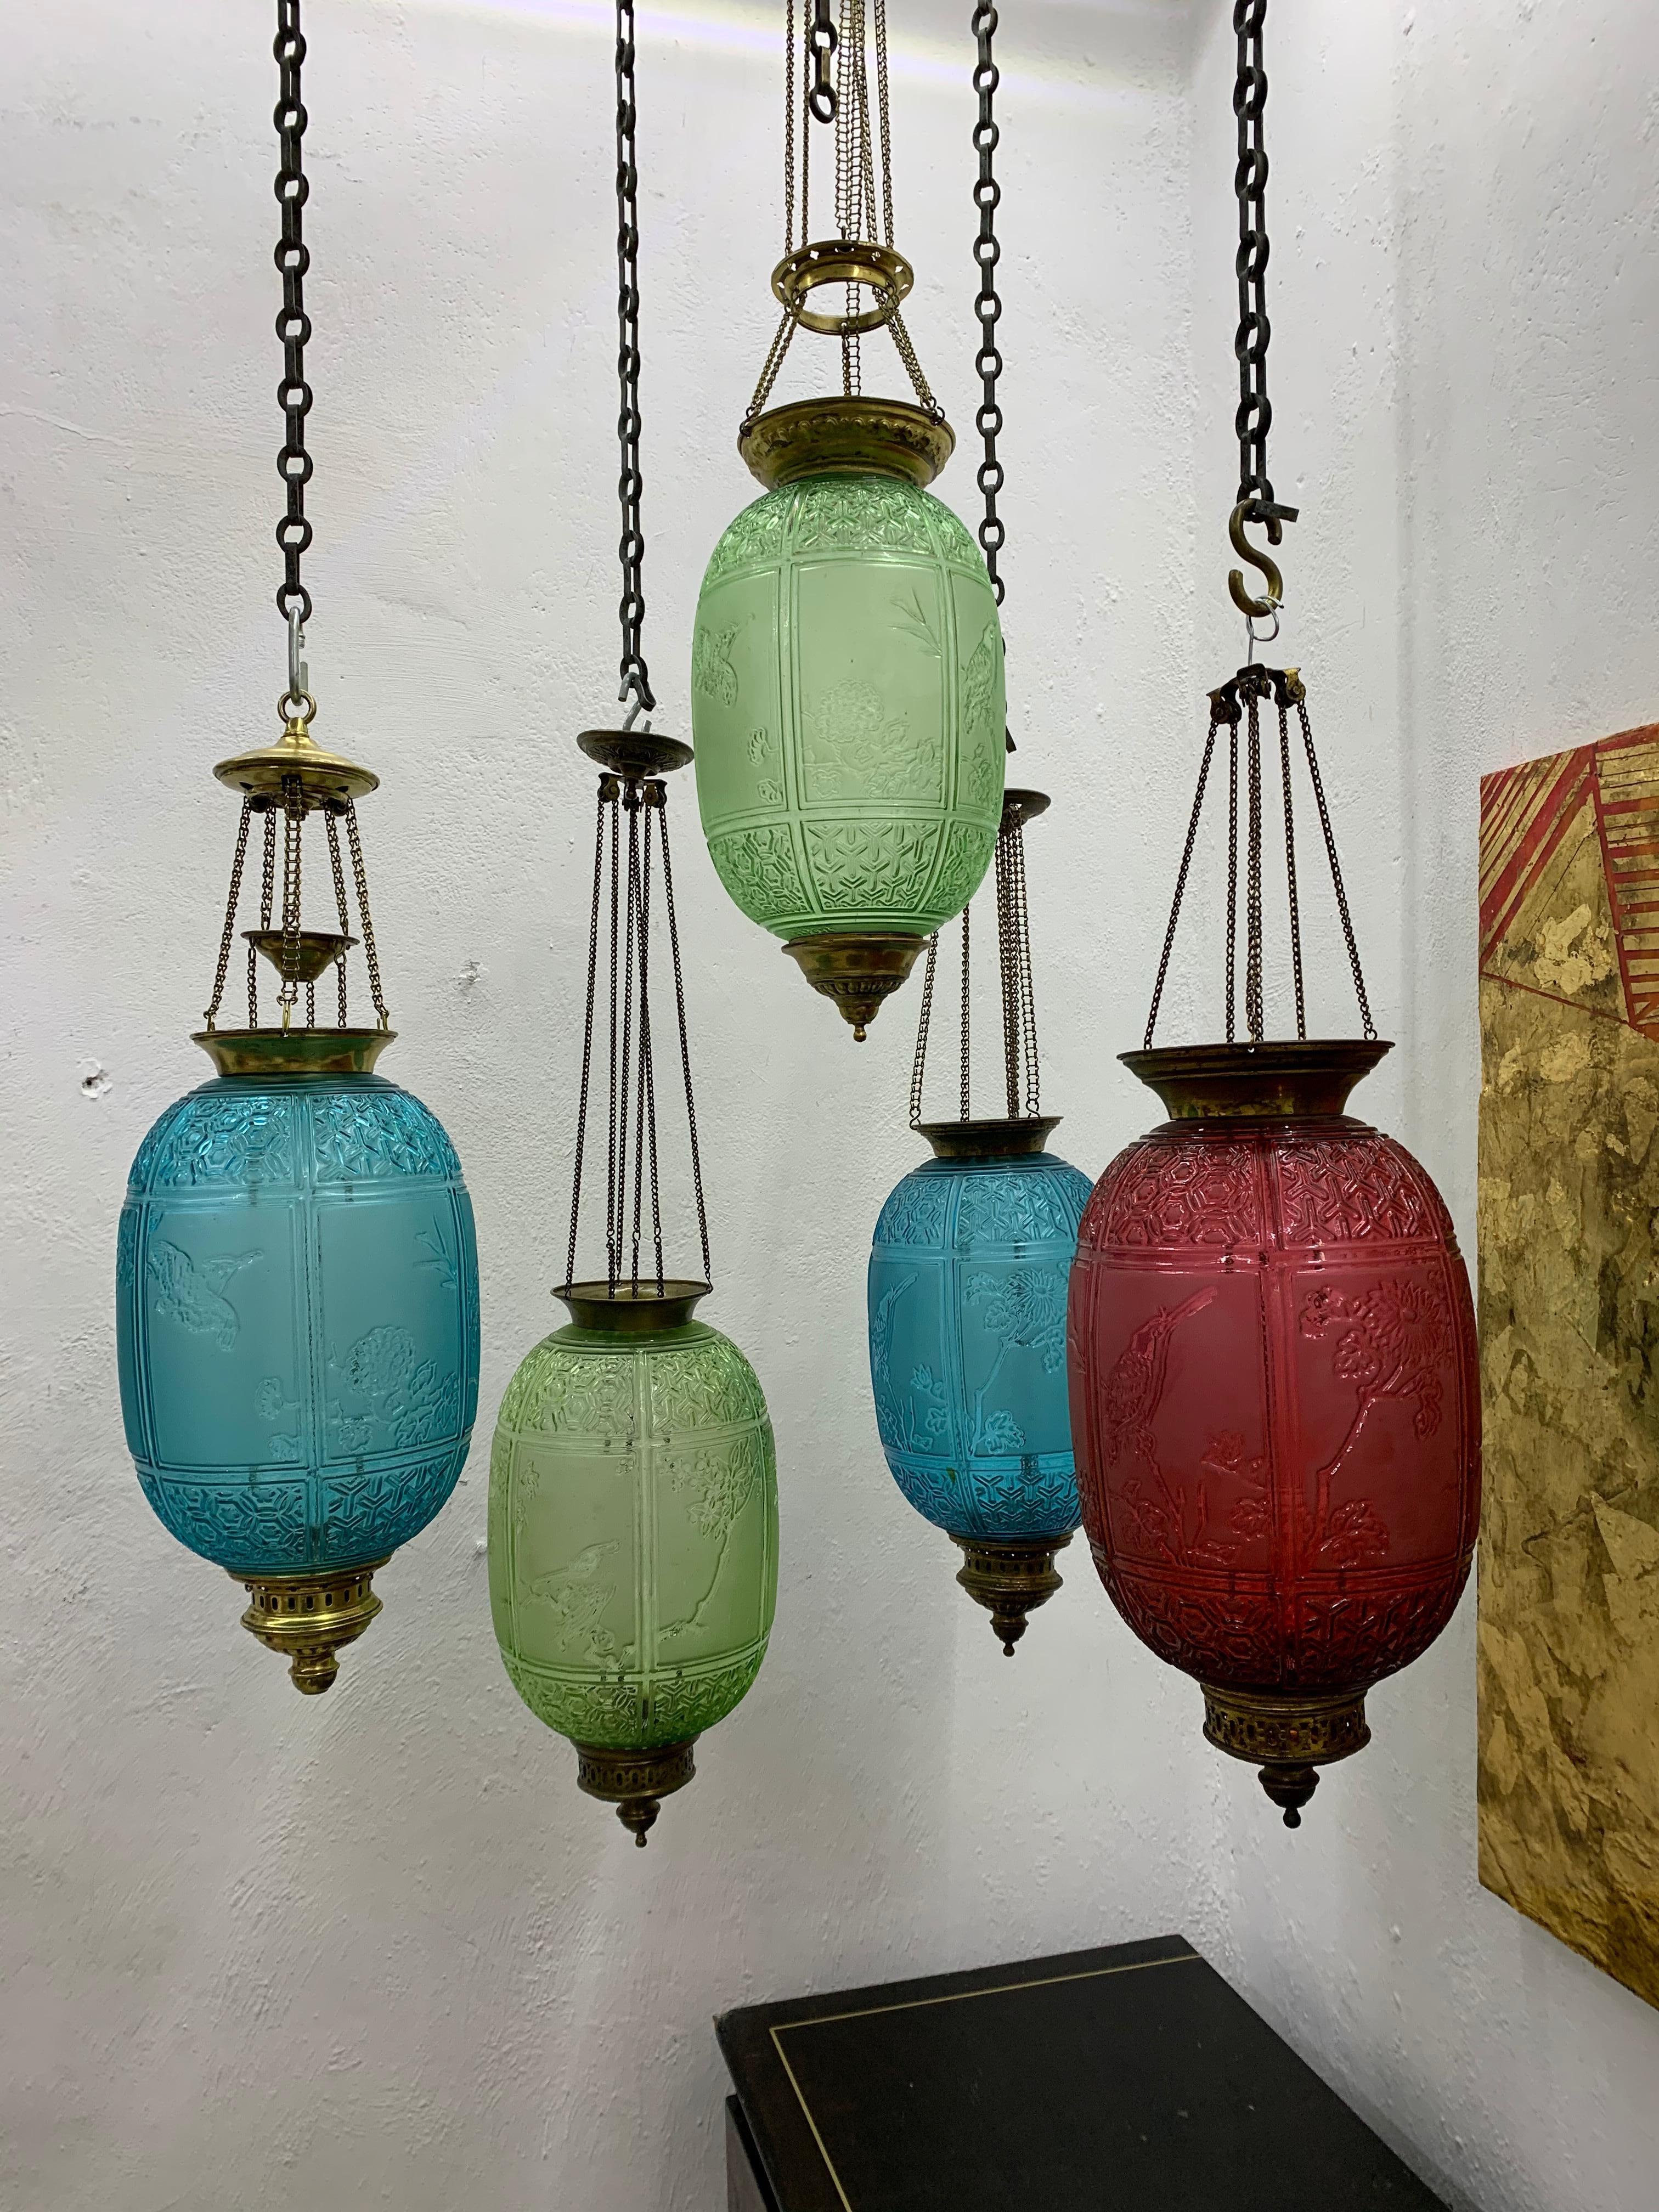 Two Green, late 19th or early 20th century glass Lanterns by Baccarat France, both  signed in the bottom with Baccarat and Depose marks.
They are in clear art nouveau / orientalist taste, depicting 3 panels with different birds as well as panels